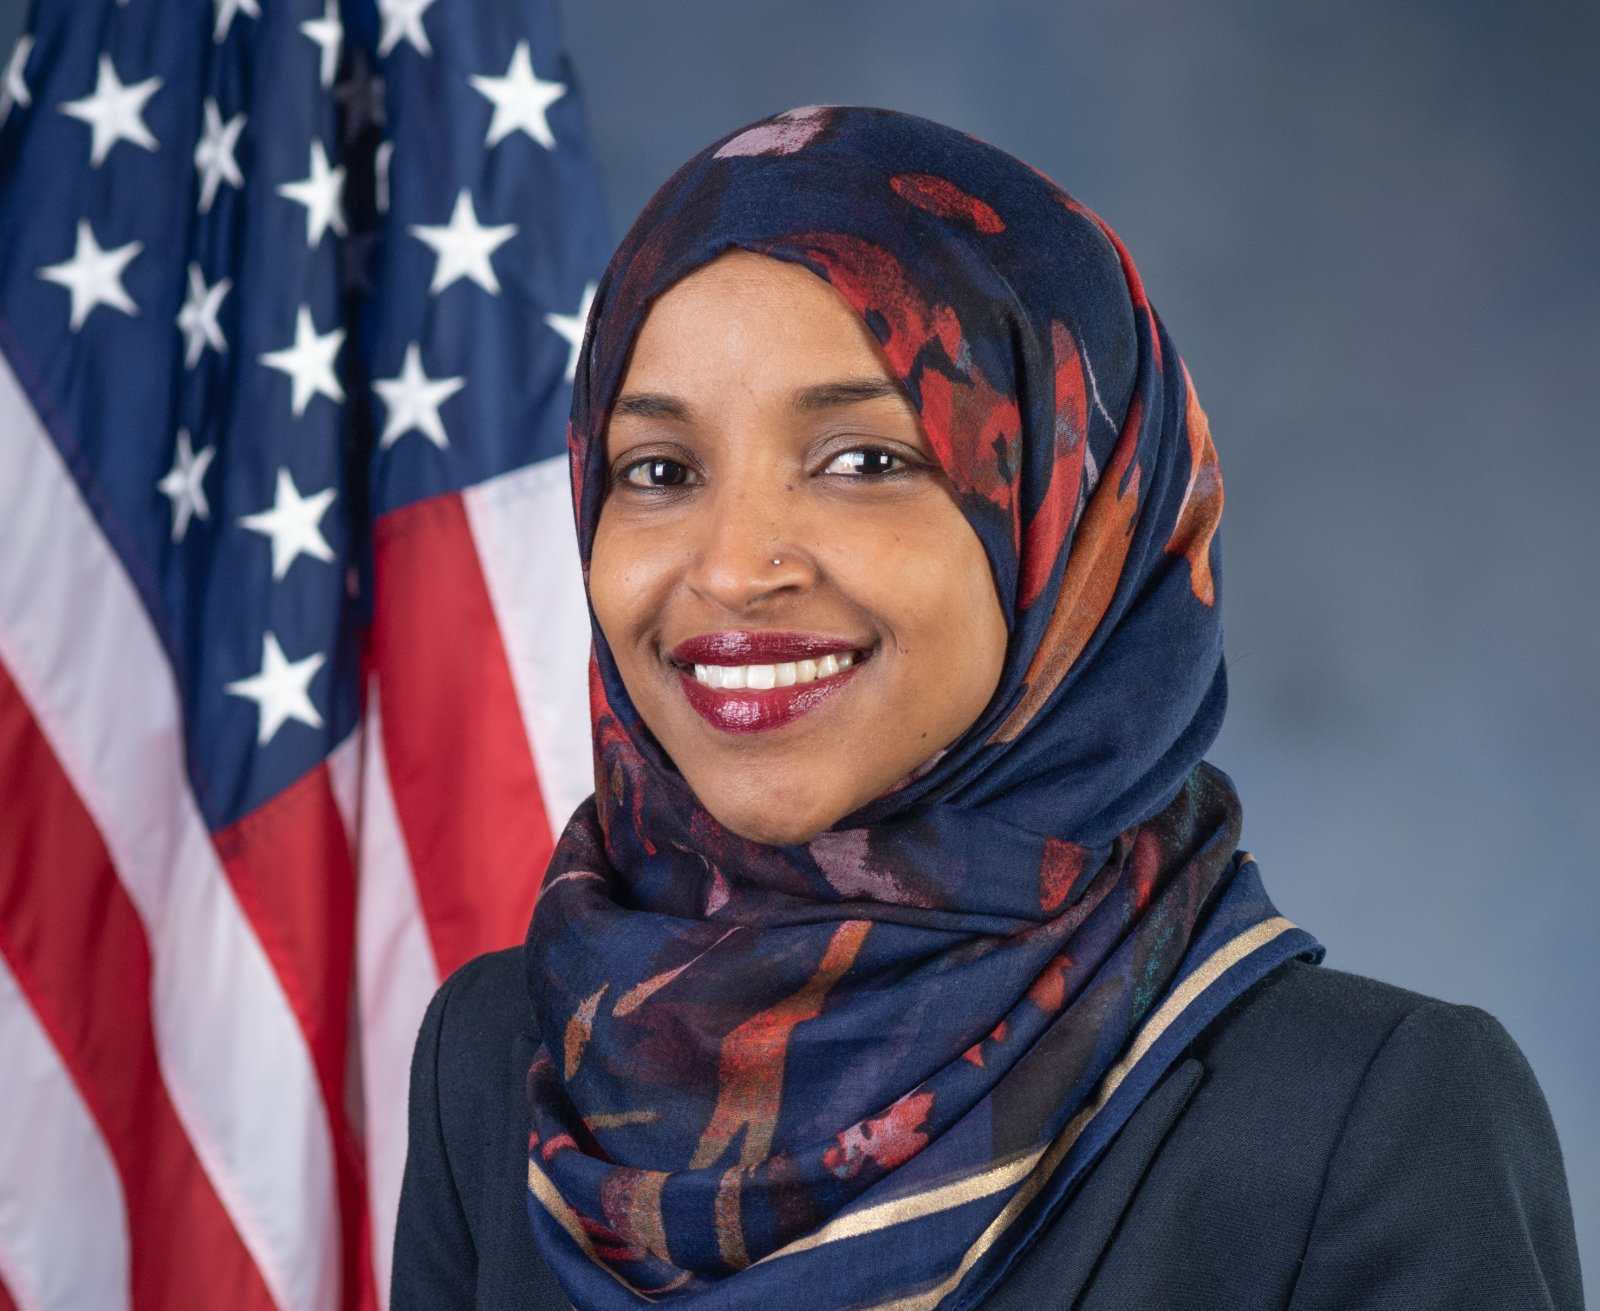 Ilhan Omar just introduced a bill to make people and the planet priorities for economic policy